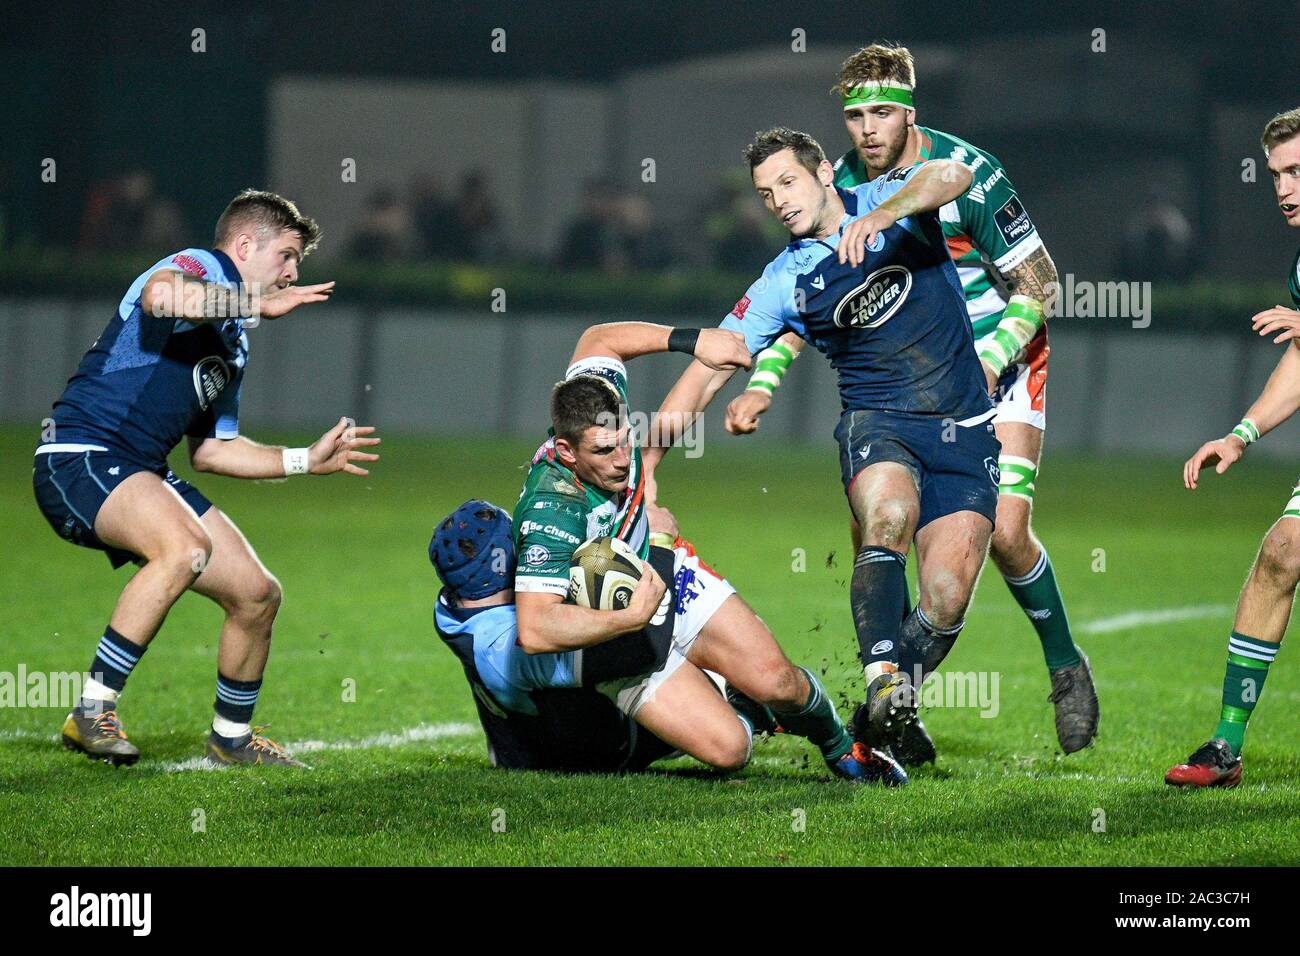 Treviso, Italy, 30 Nov 2019, ian keatley (treviso) blocked during Benetton  Treviso vs Cardiff Blues - Rugby Guinness Pro 14 - Credit: LPS/Ettore  Griffoni/Alamy Live News Stock Photo - Alamy